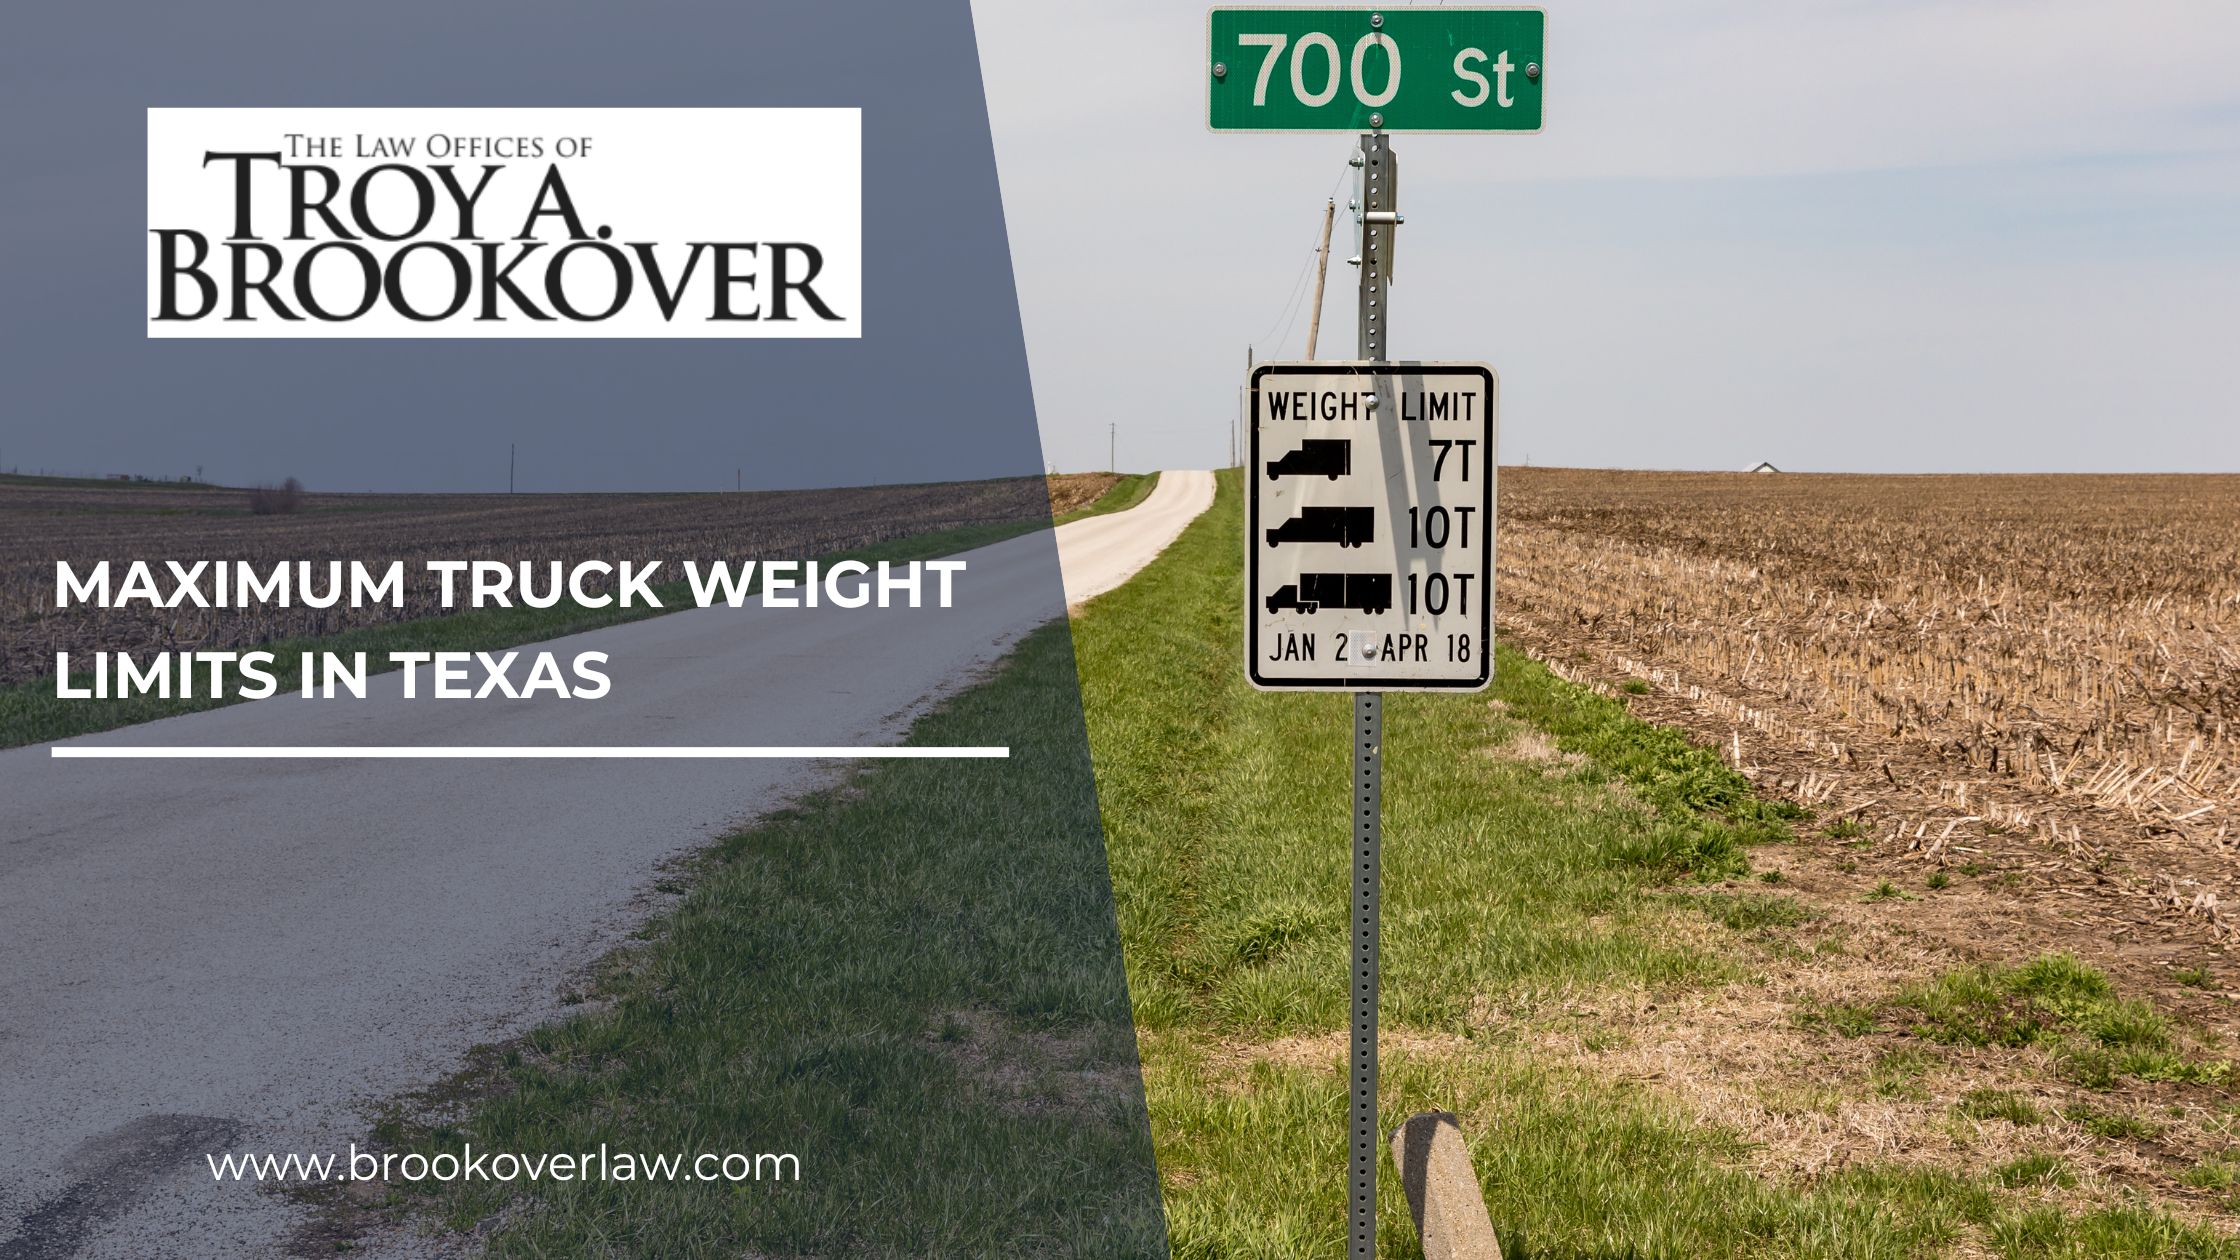 Promotional graphic from The Law Offices of Troy A. Brookover featuring a road sign indicating 'Maximum Truck Weight Limits in Texas' highlighting legal expertise in trucking regulations.